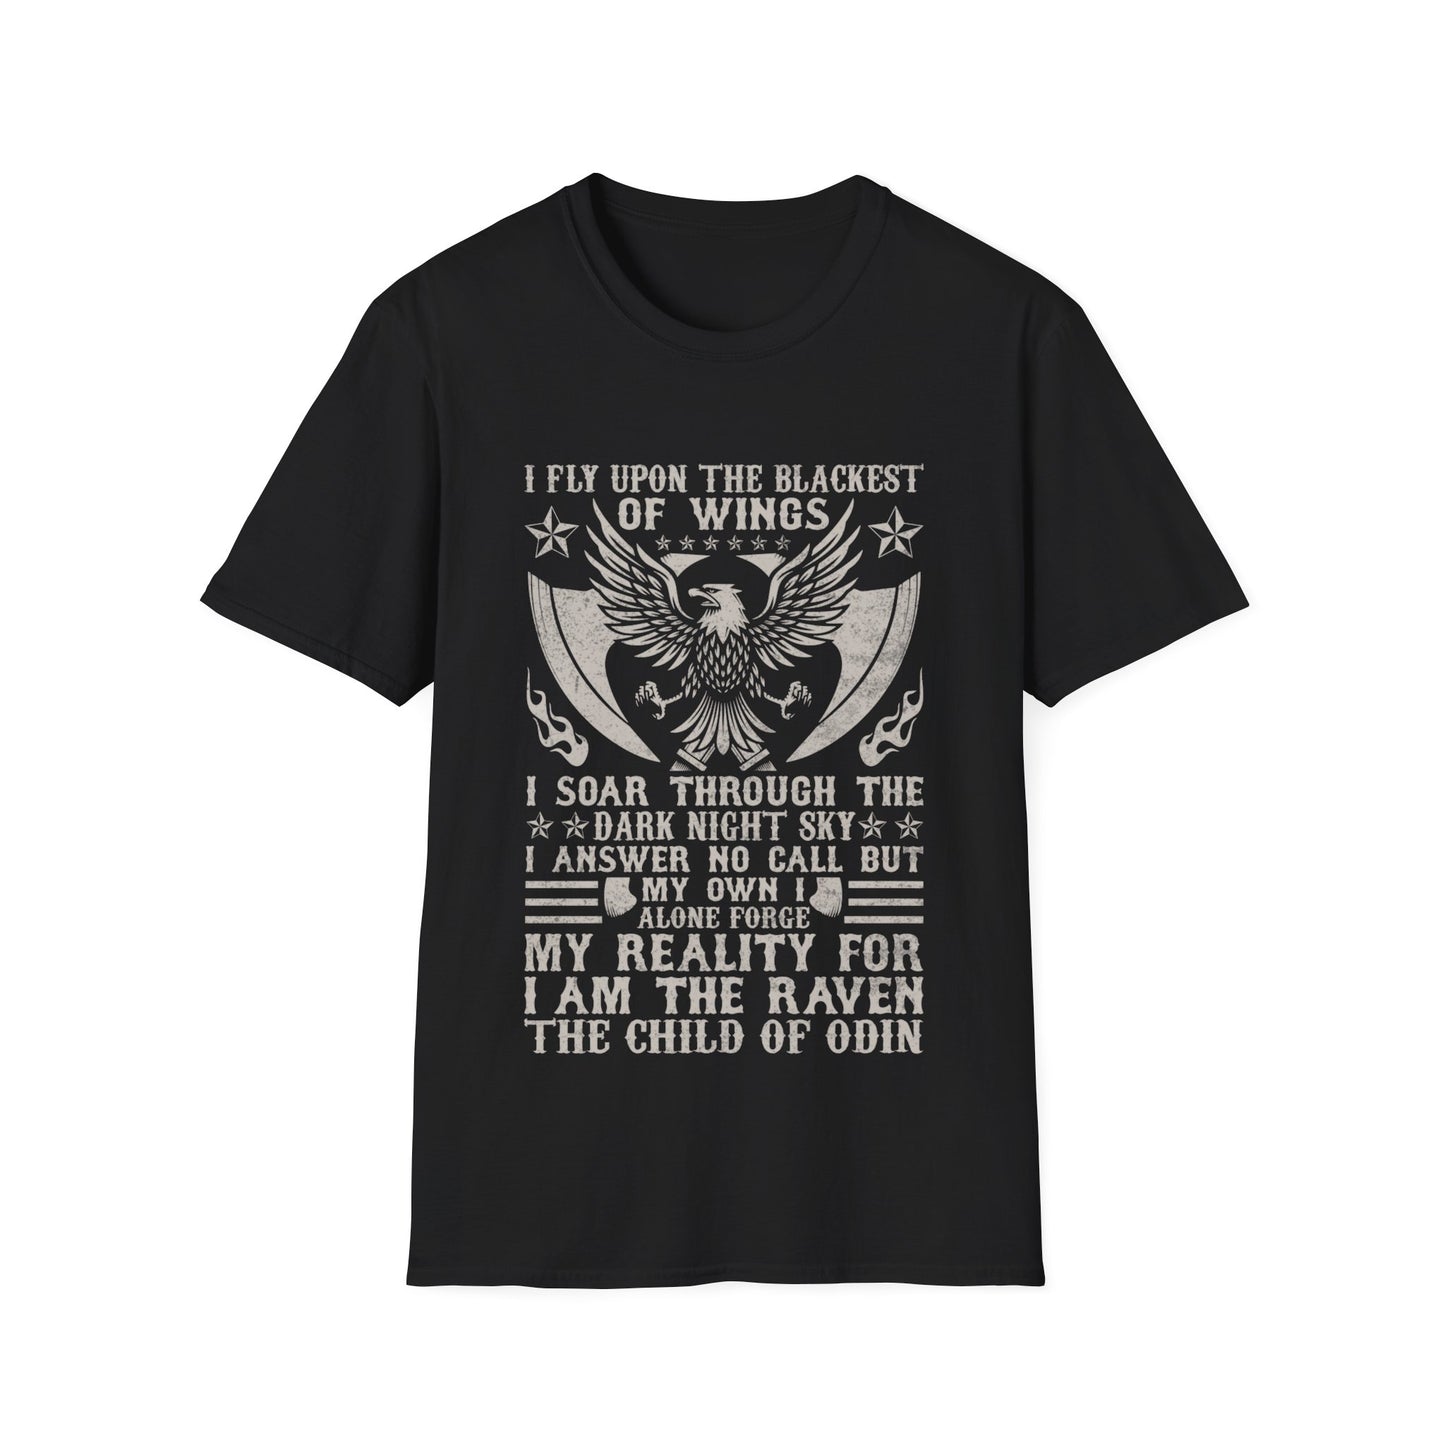 I Fly Upon The Blackest Of Wings I Soar Through The Dark Night Sky I Answer No Call But My Own I Alone Force My Reality For I Am The Raven The Child Of Odin T-Shirt